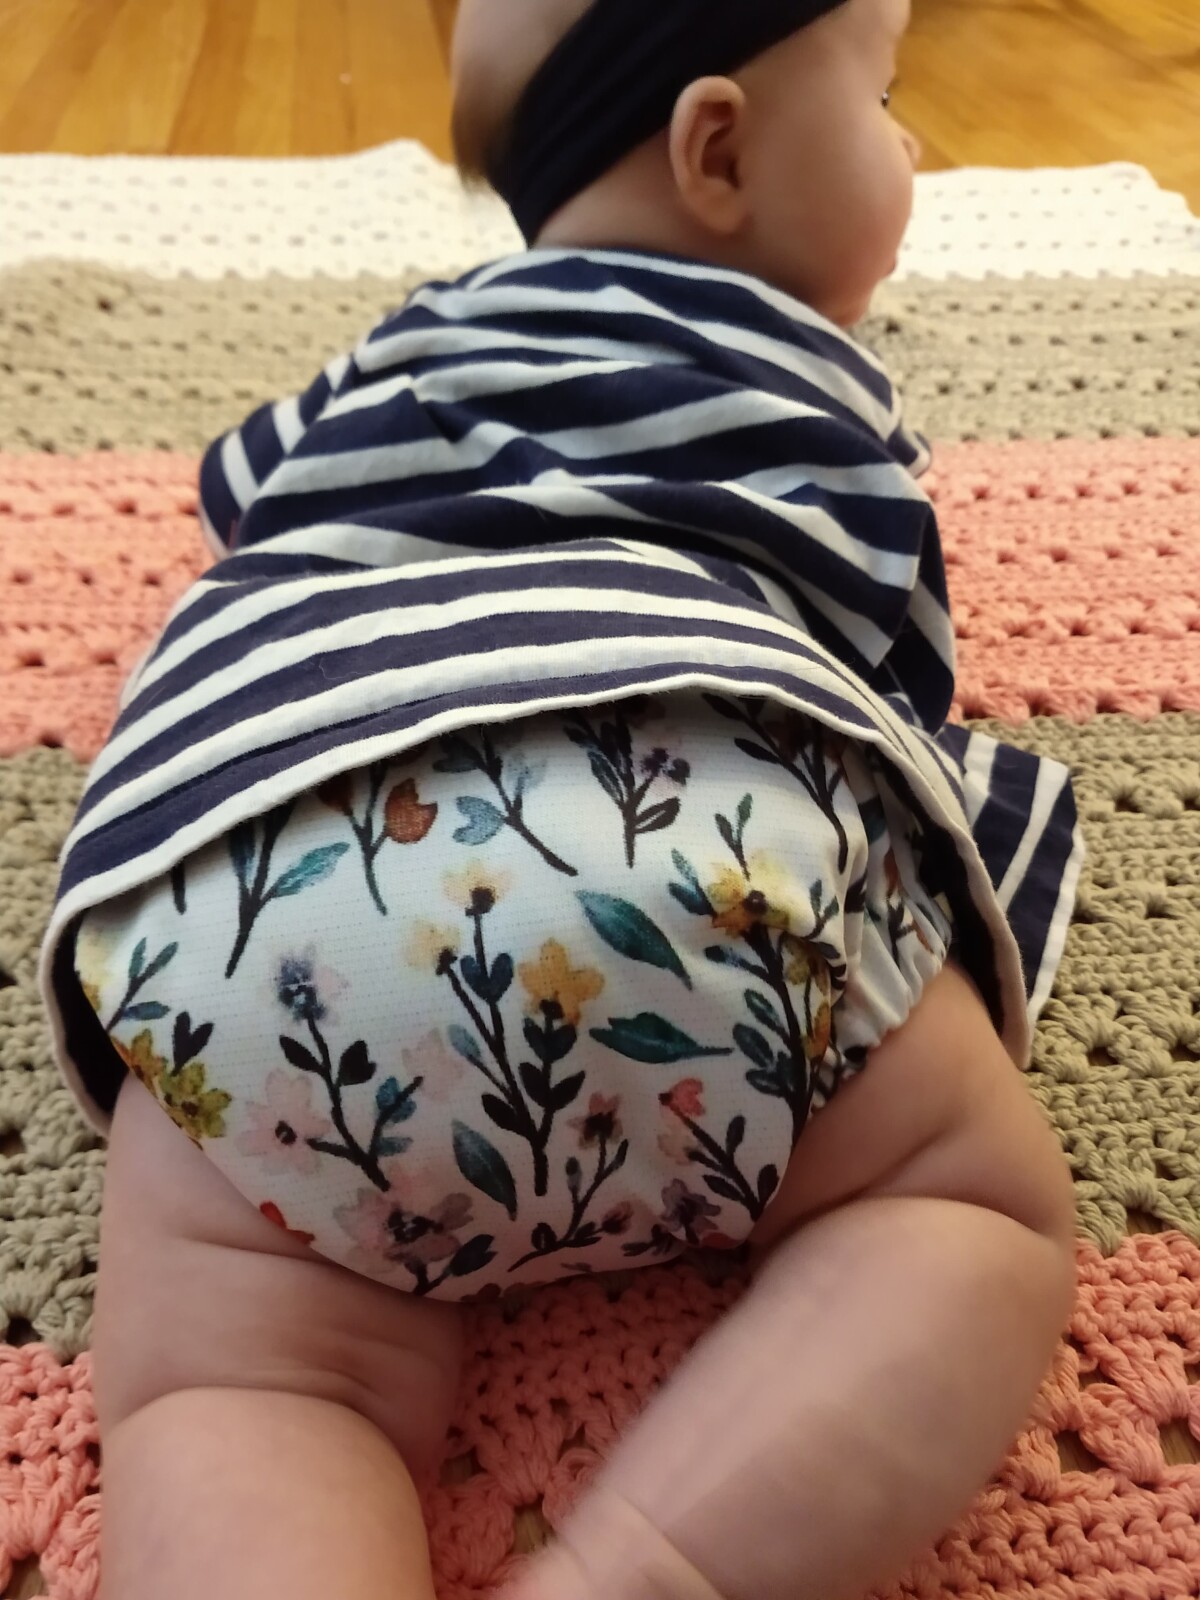 How to Make Cloth Diapering Work as a Teacher